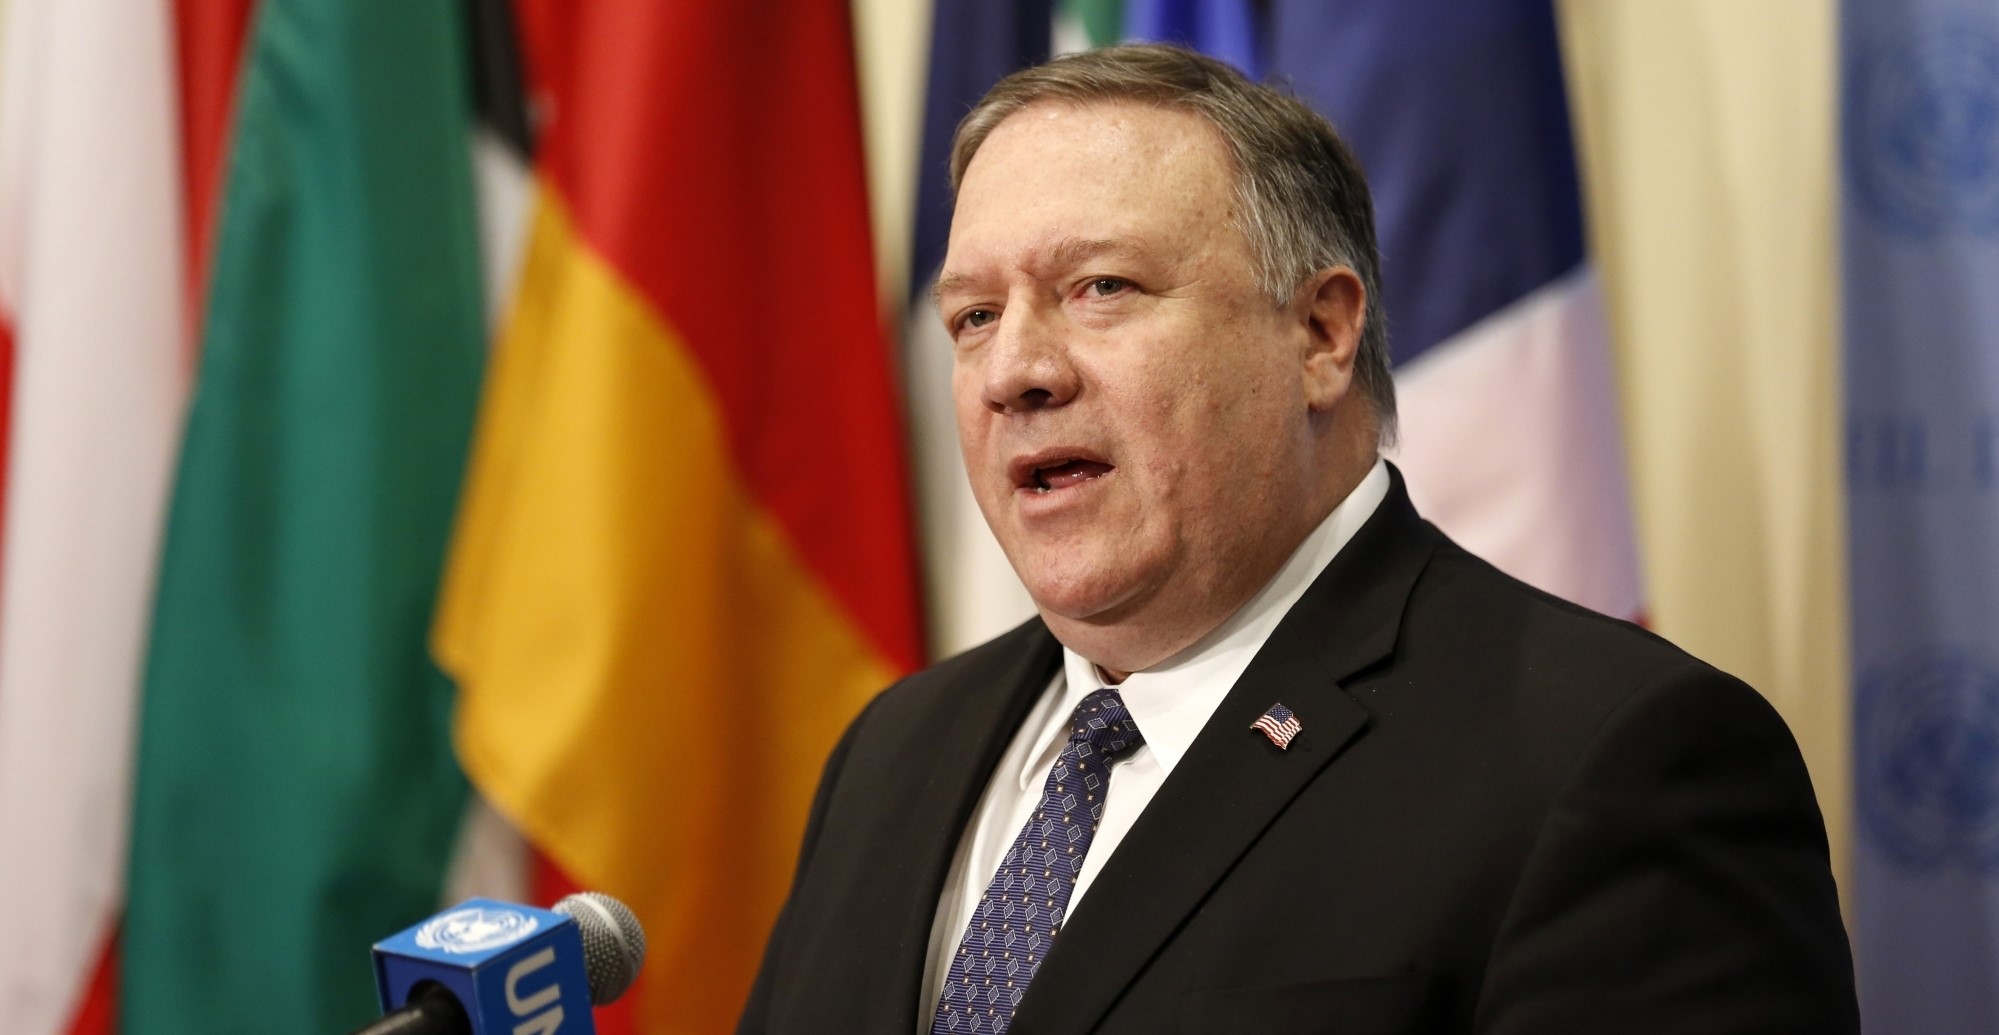 UPDATE 2-Pompeo accuses Iran of undermining Afghanistan peace efforts